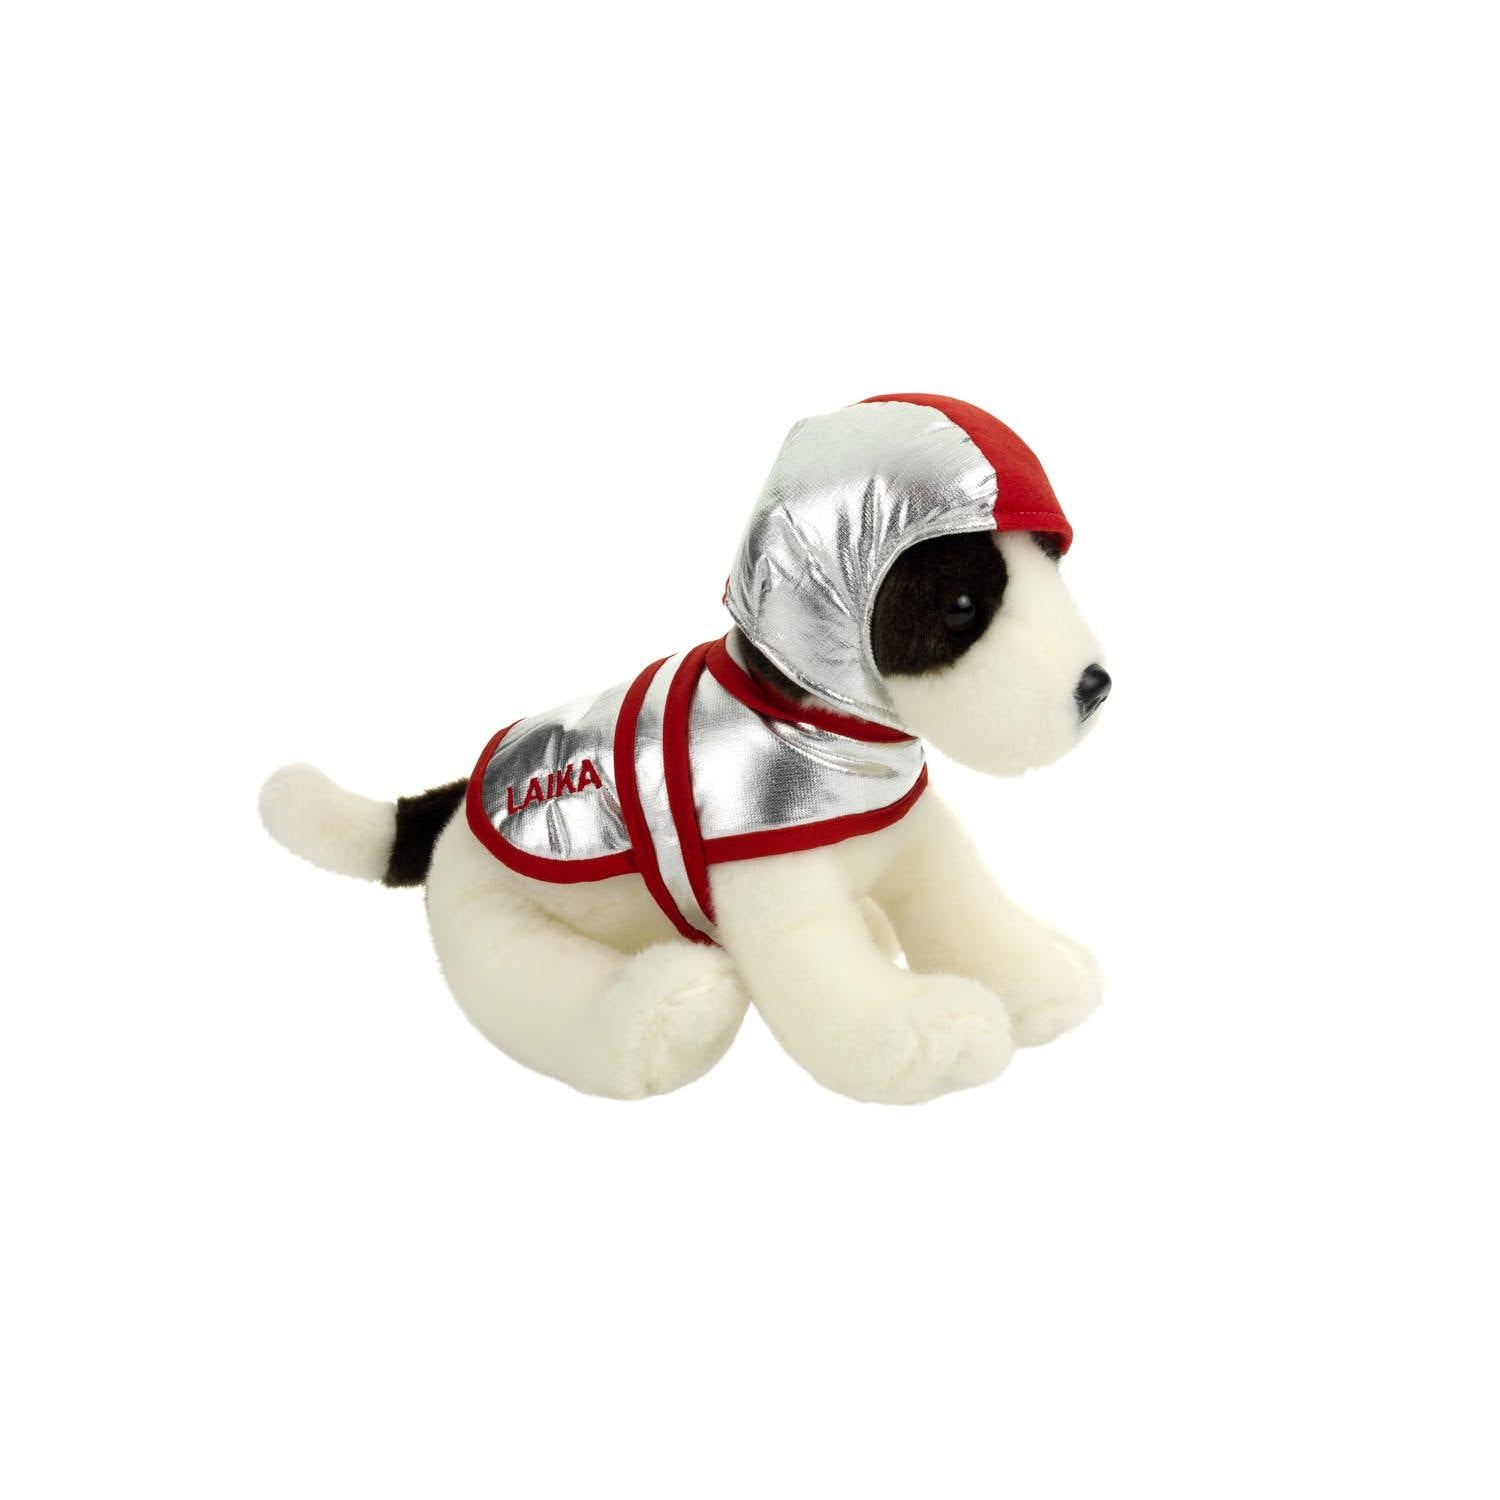 Laika Cuddly Toy Dog-4 -Soft Toy - Science Museum